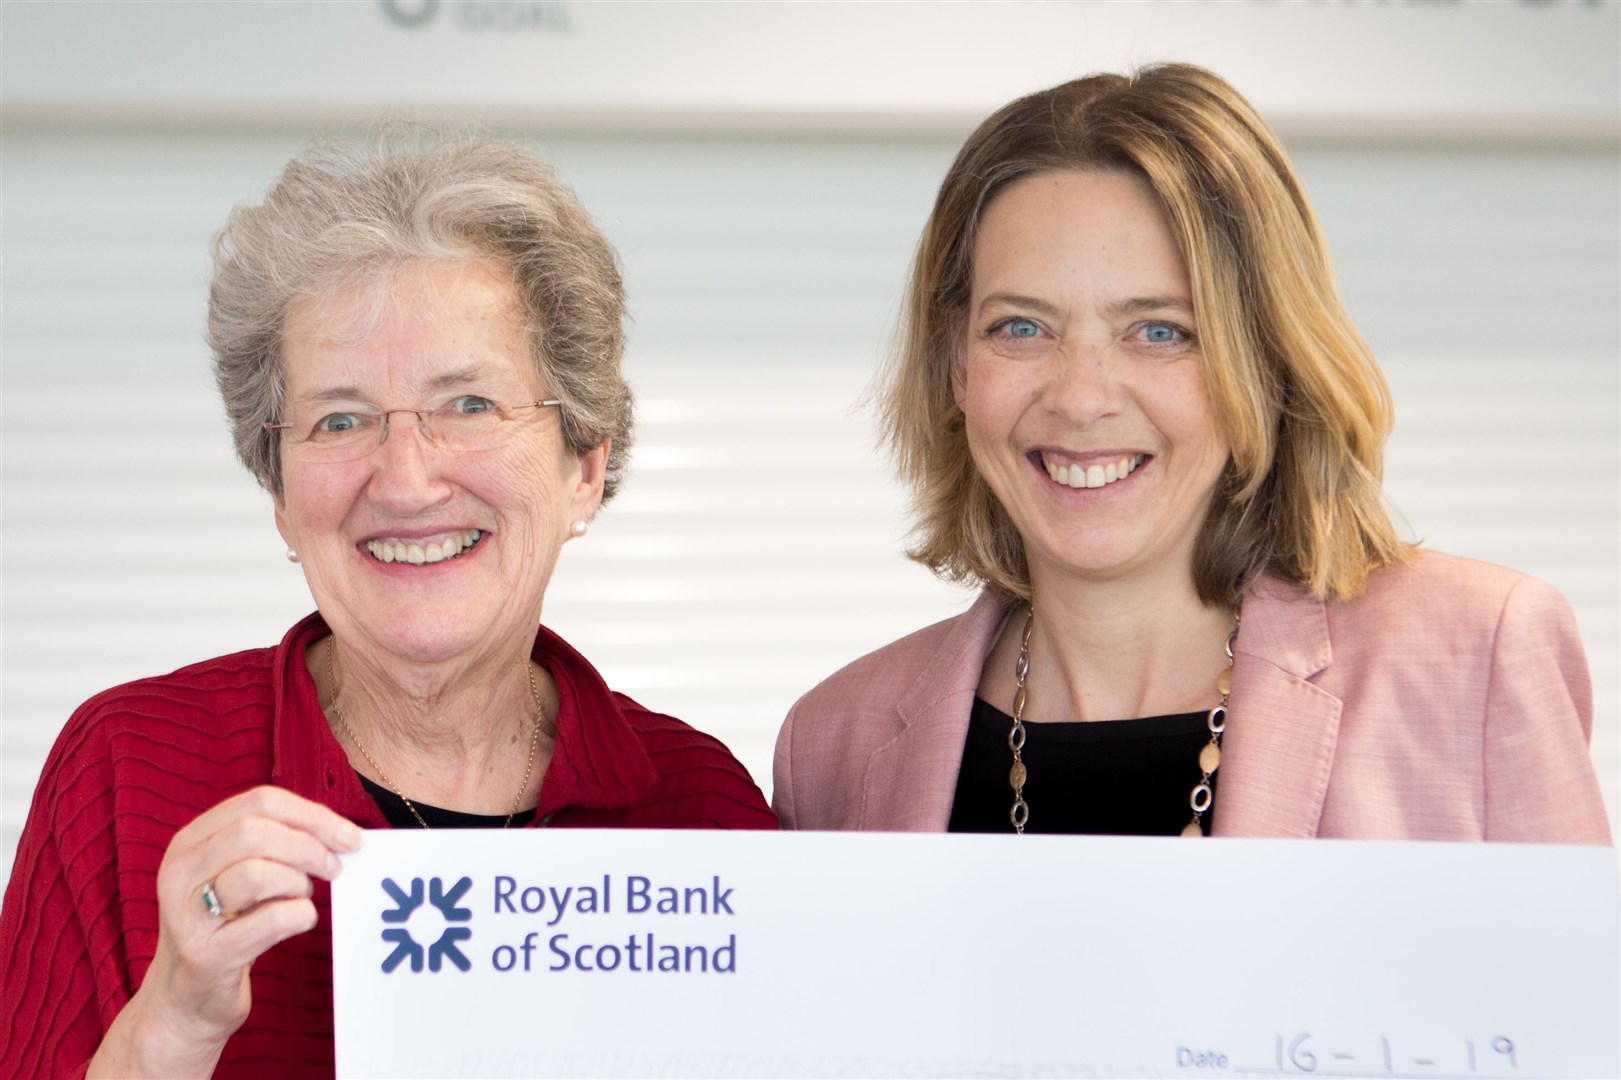 Sheila Proudfoot of the Elsie Normington Foundation is presented with a cheque from HBW for £4000 by last year's HBW president Jillian Sharp (right).